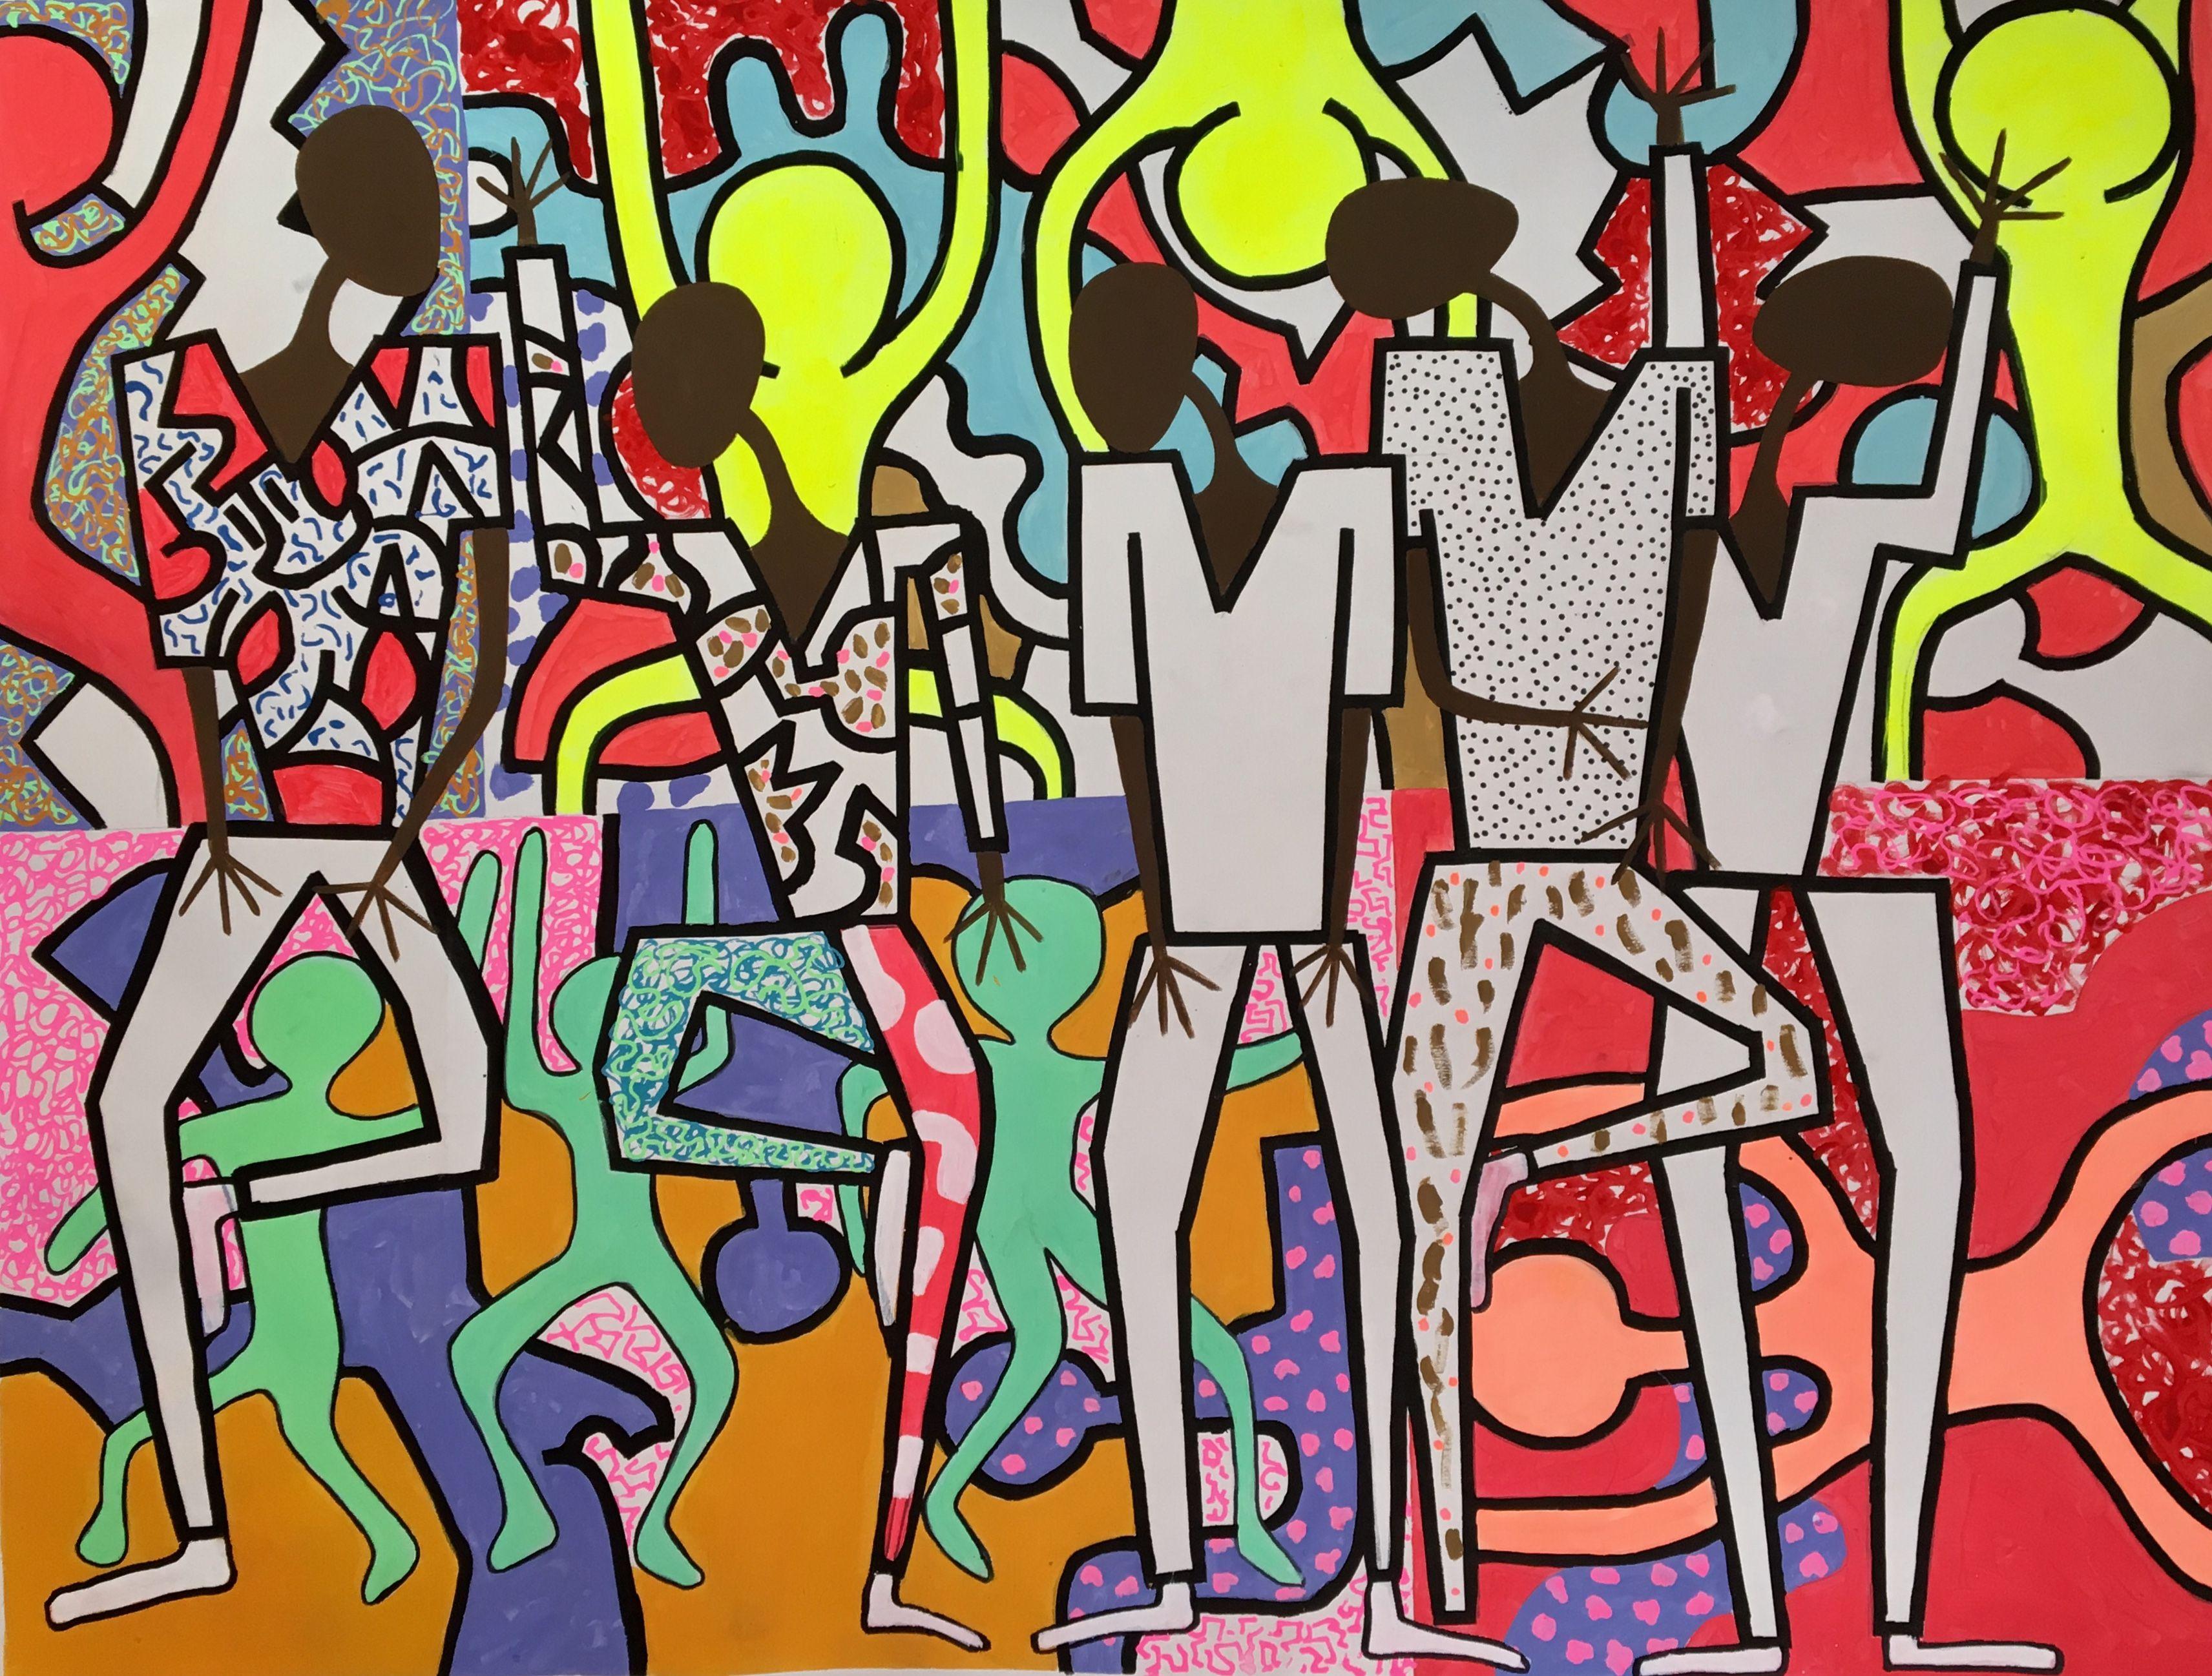 acrylic painting on the canvas. This canvas is inspired by african art, contemporary art, by Picasso, Matisse, Haring, Basquiat. It is also inspired by fresh, contemporary music I listen by painging. Expressing african-like figures on background